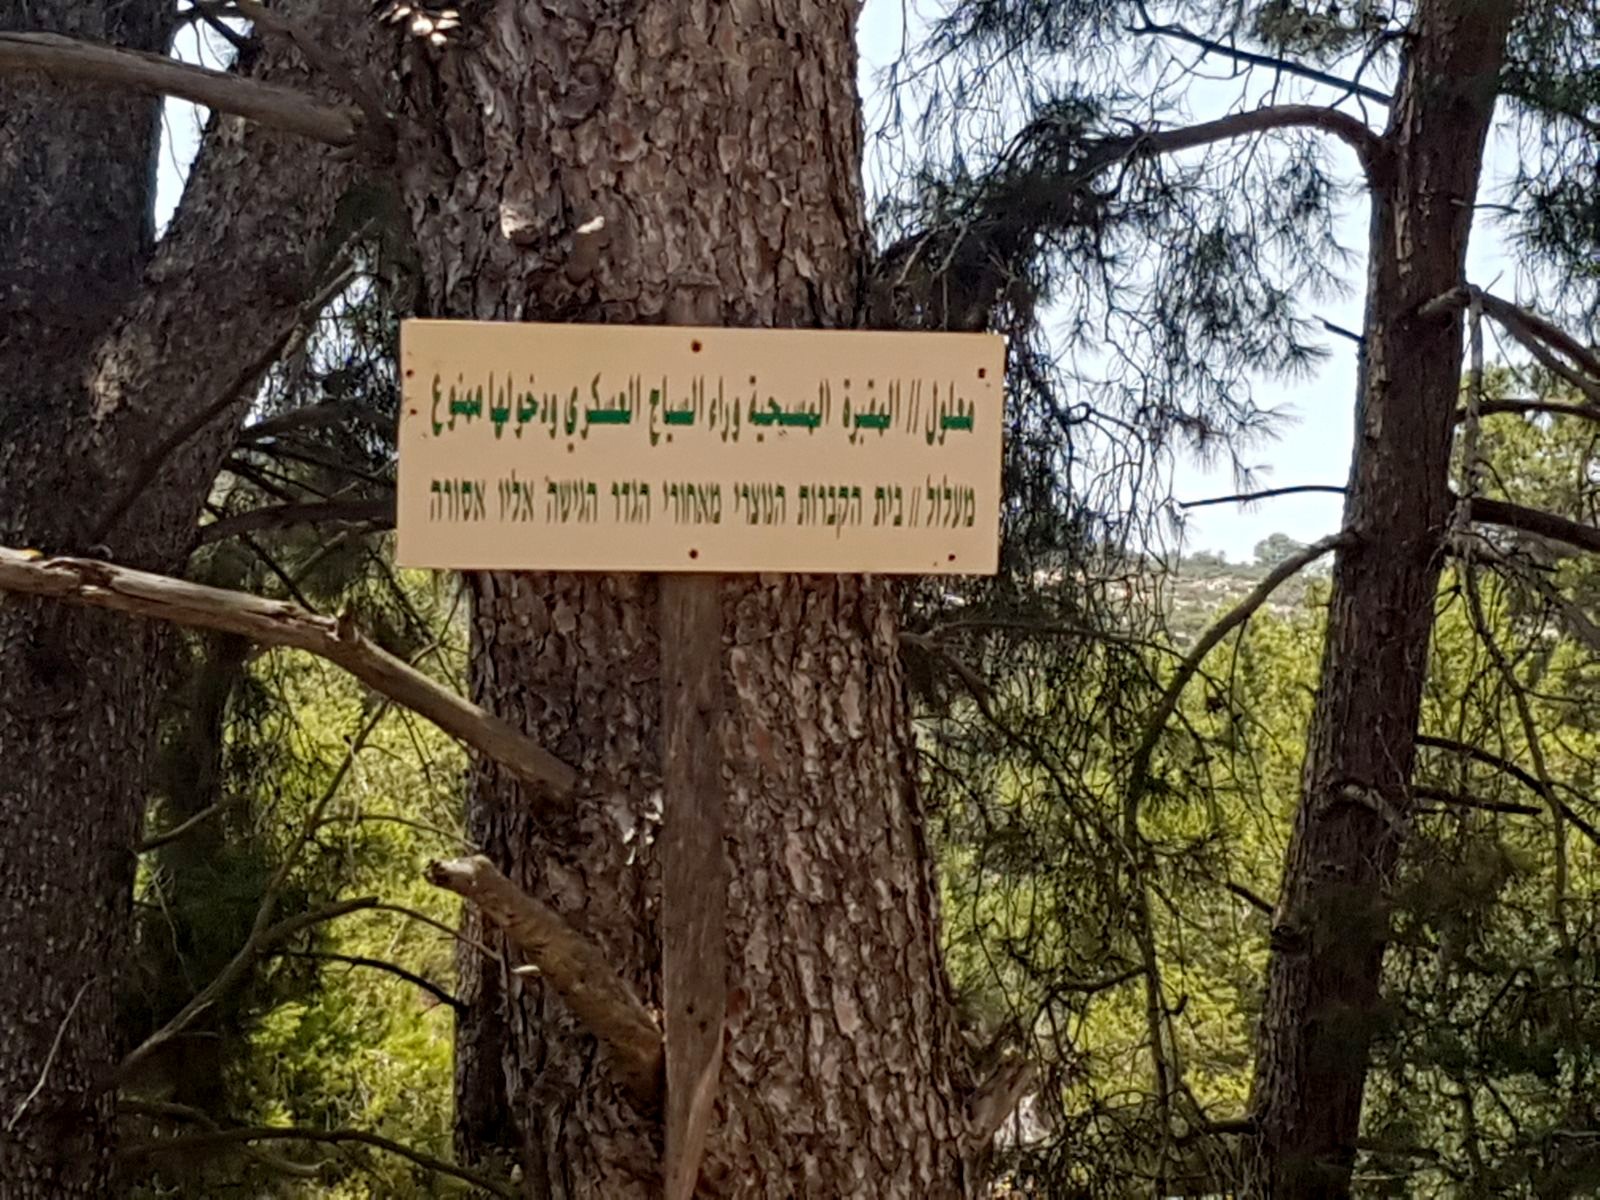 A Hebrew and Arabic sign in Ma'alul on the edge of the Israeli military base thst reads: Maalul | Christian cemetery behind the fence. Entry is forbidden